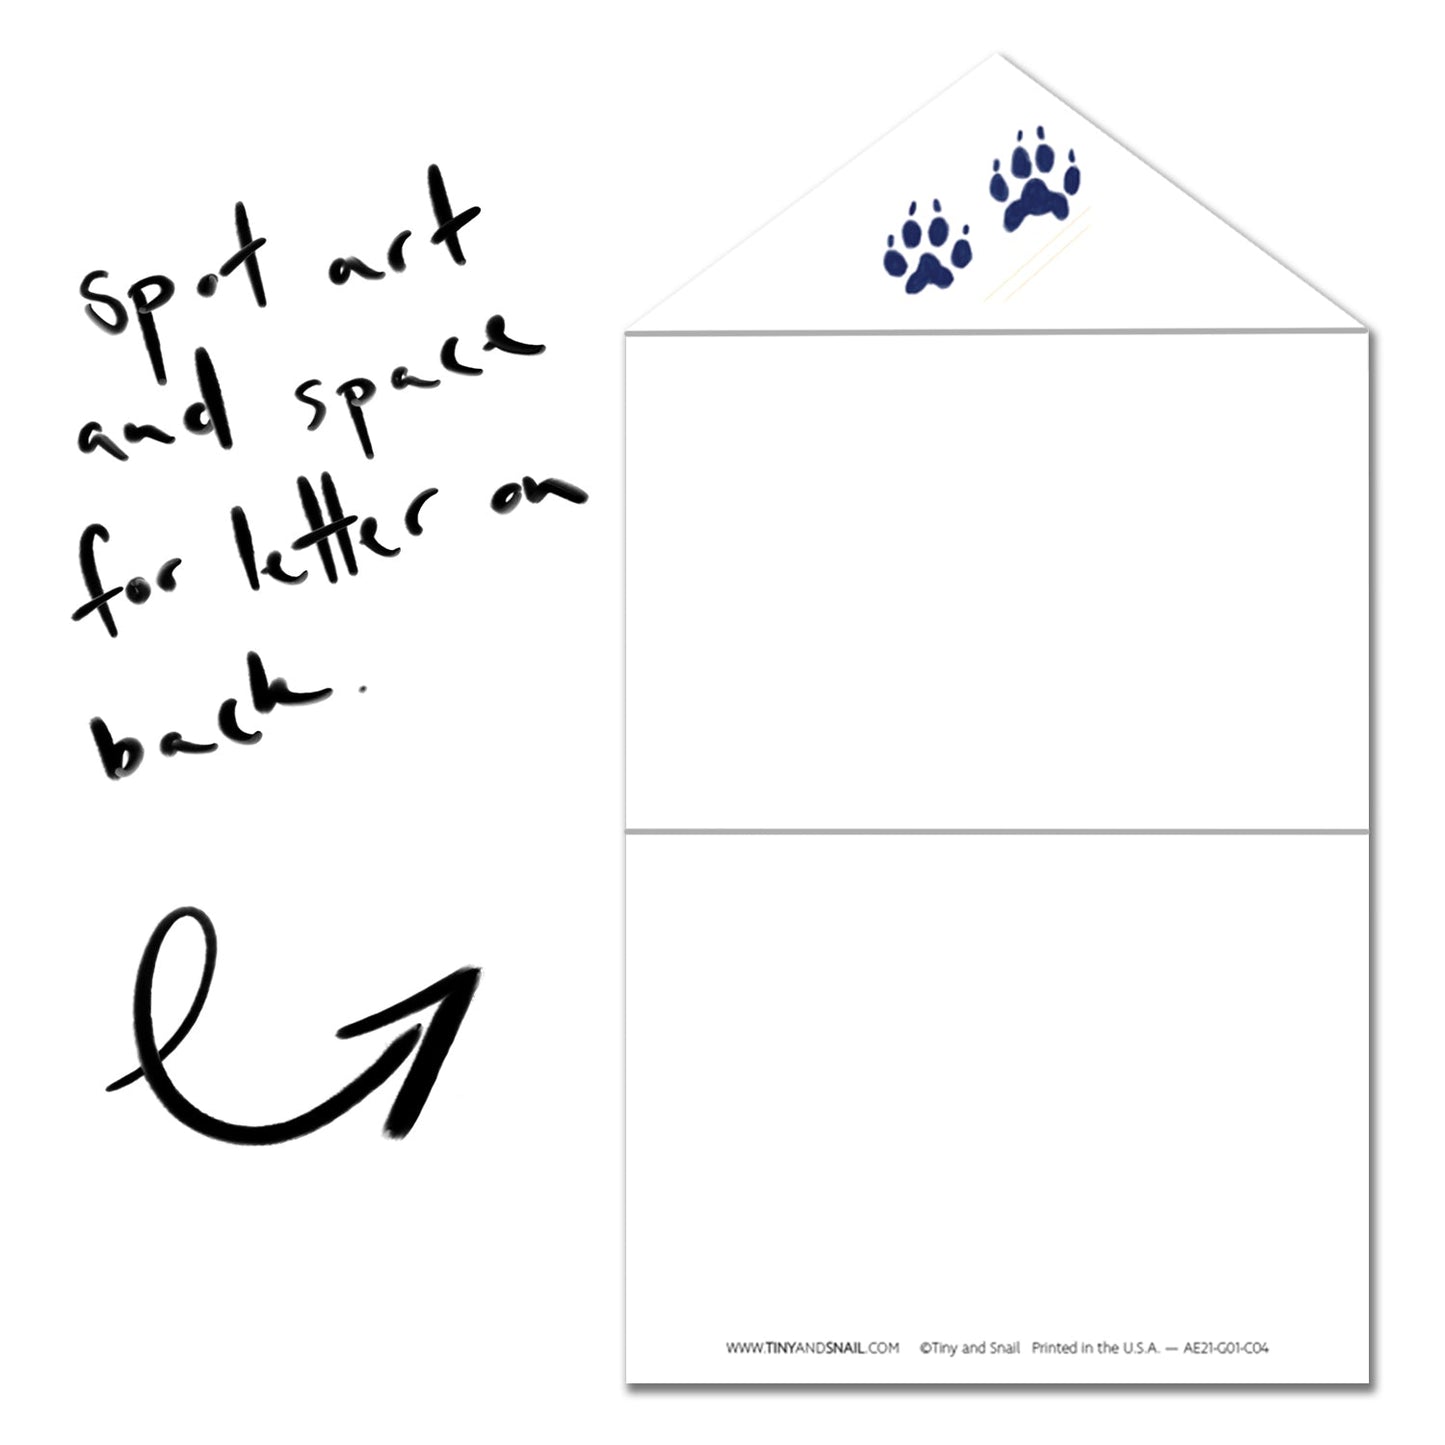 Fox Jumped Over the Moon · Instant Artful Envelope Stationery IAE Tiny and Snail